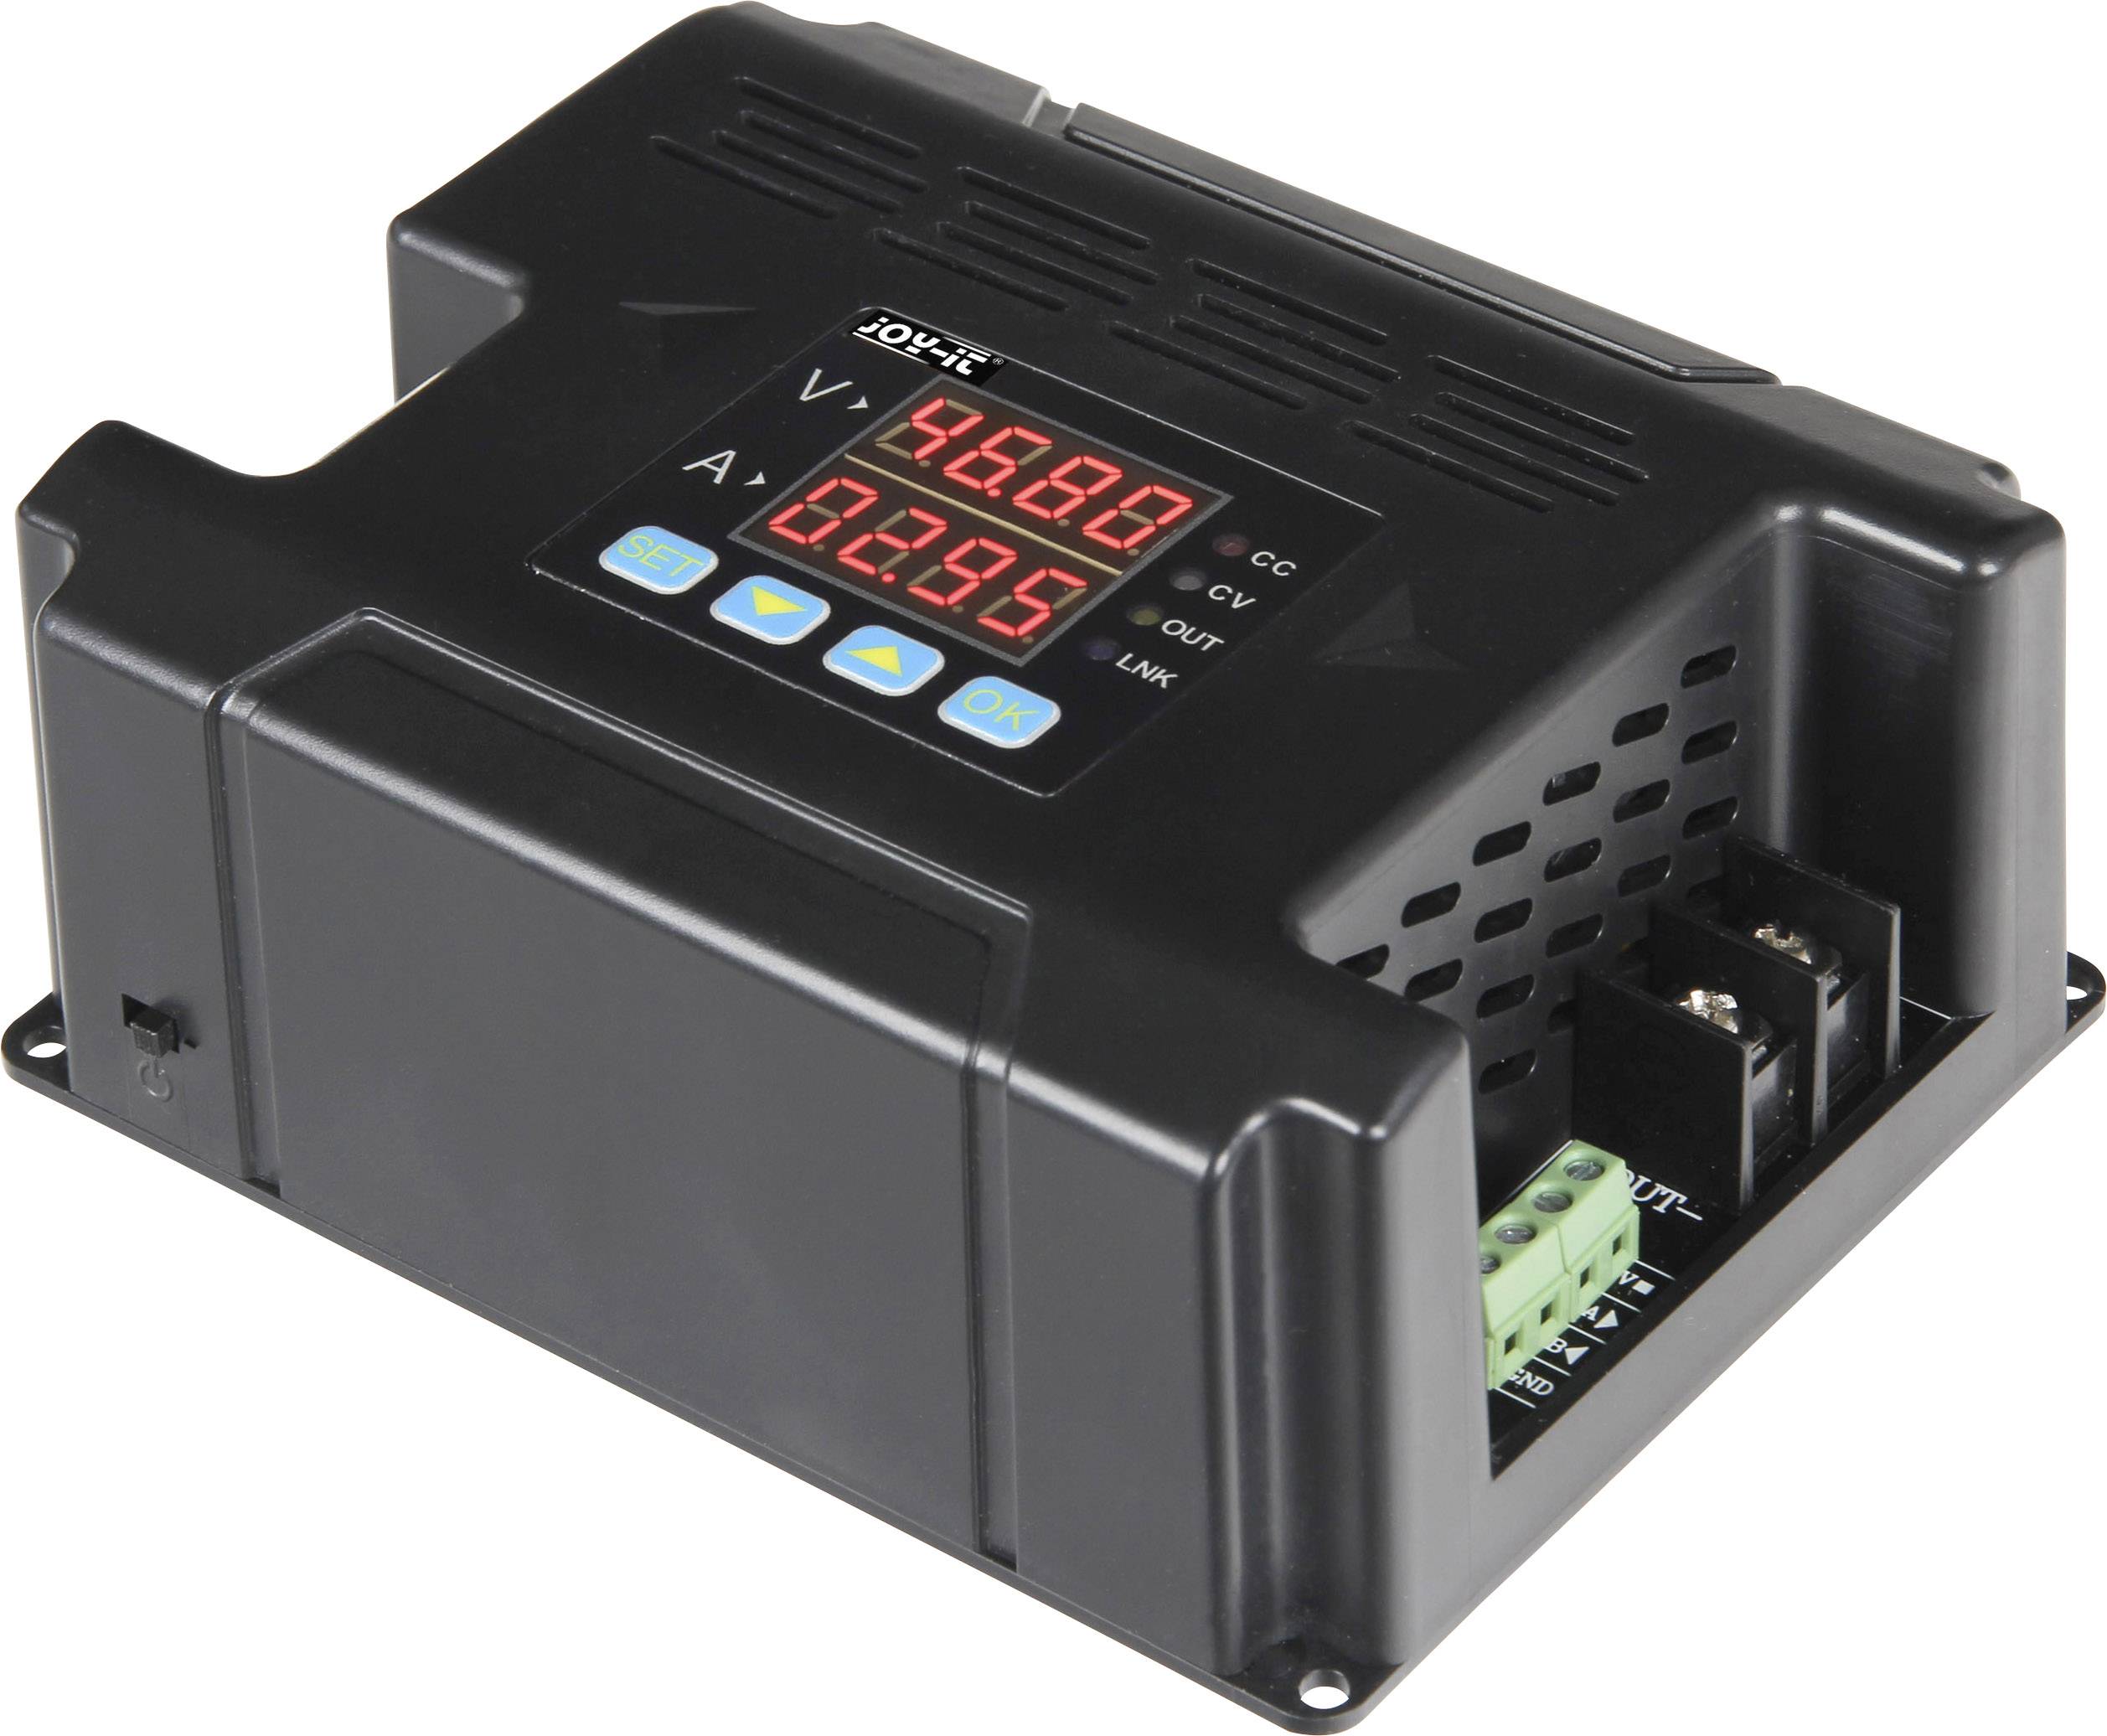 DPM8624-485RF Programmable Power Supply Adjustable DC Power Supply RS-485+Remote 